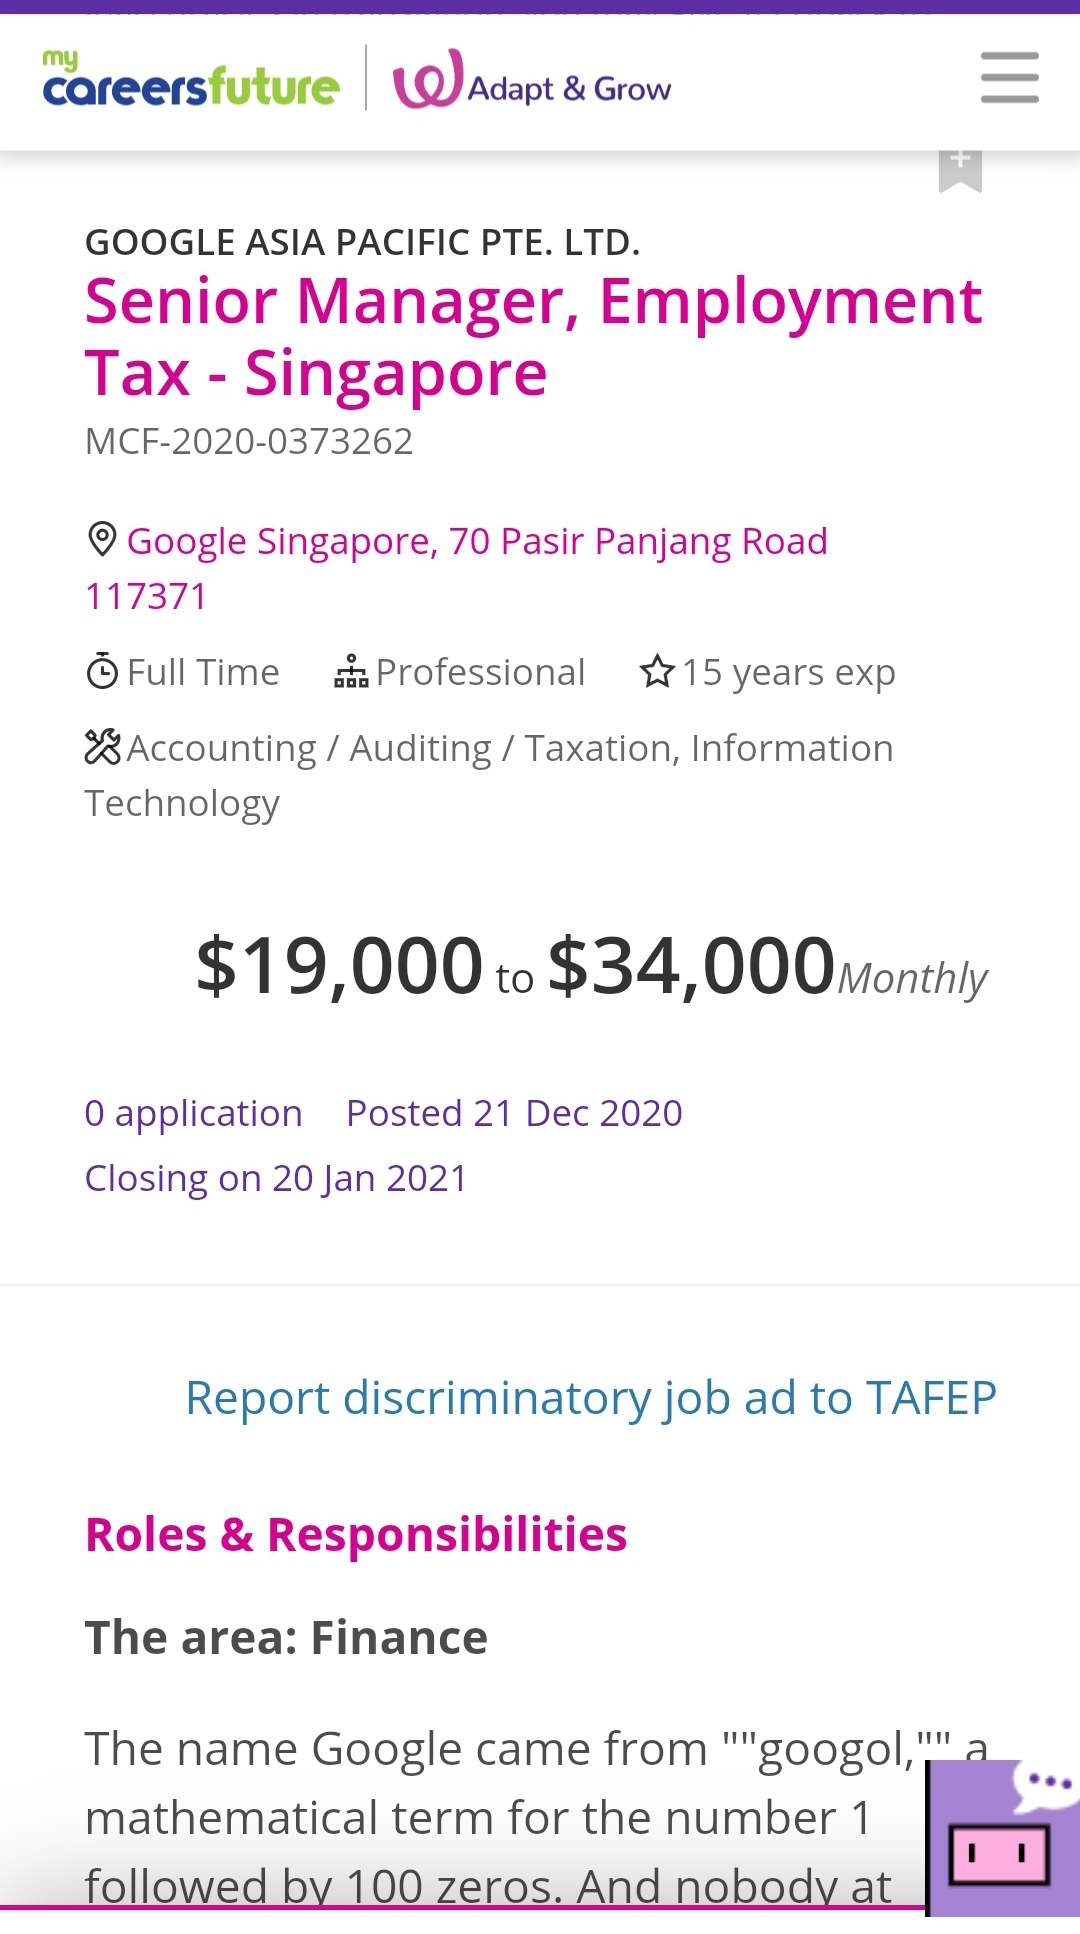 tax manager salary